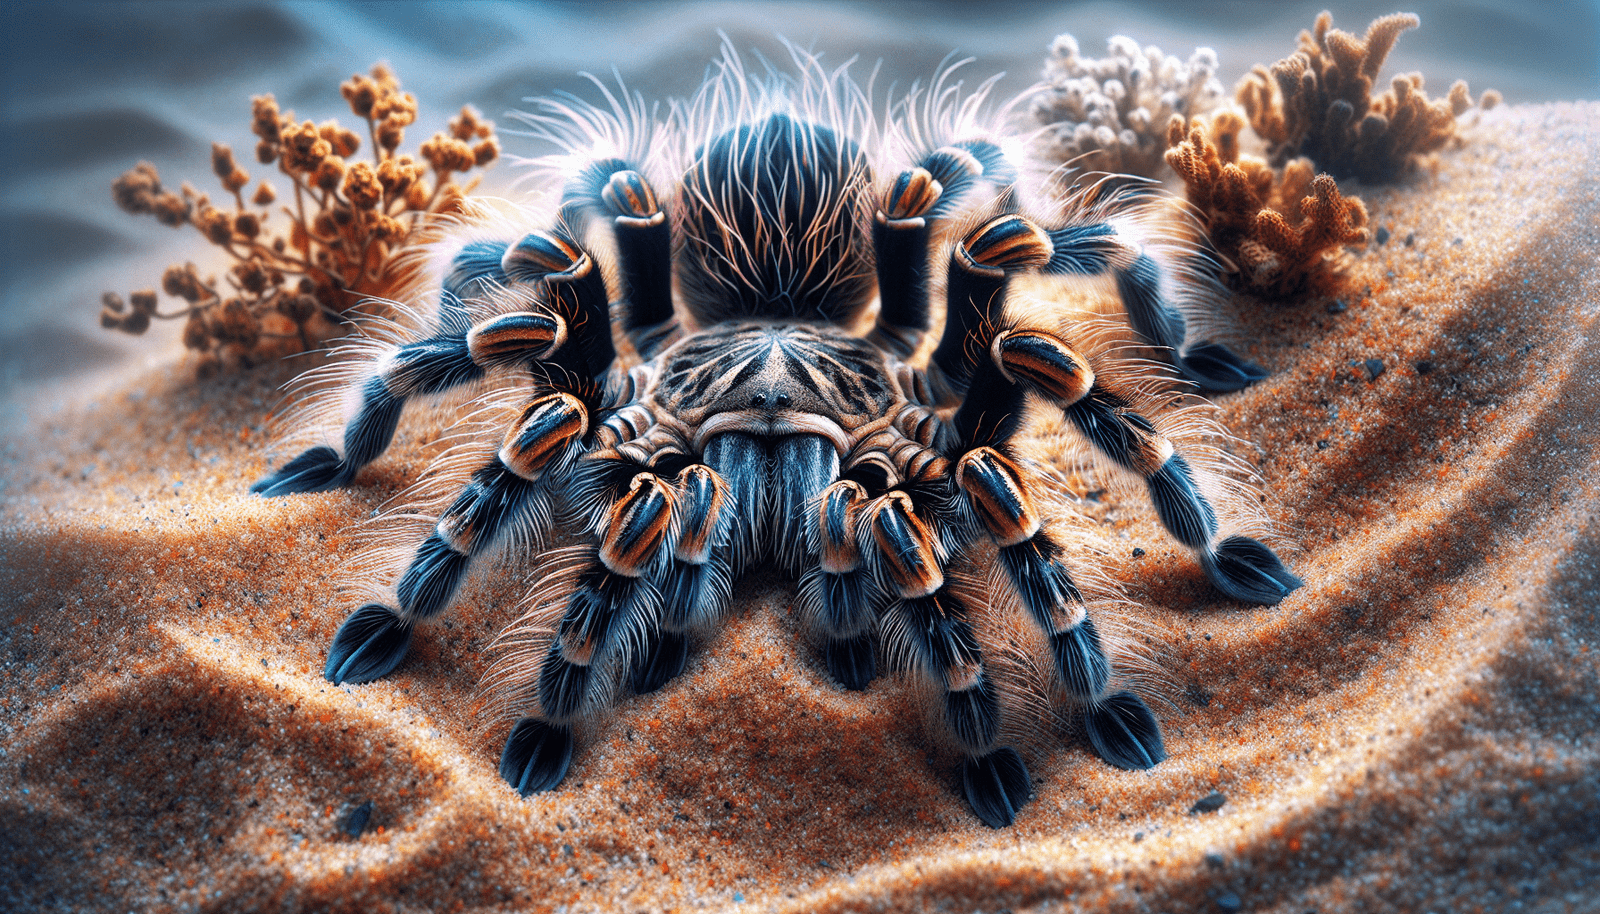 Can You Recommend Some Desert-dwelling Tarantula Species That Are Suitable For Captivity?